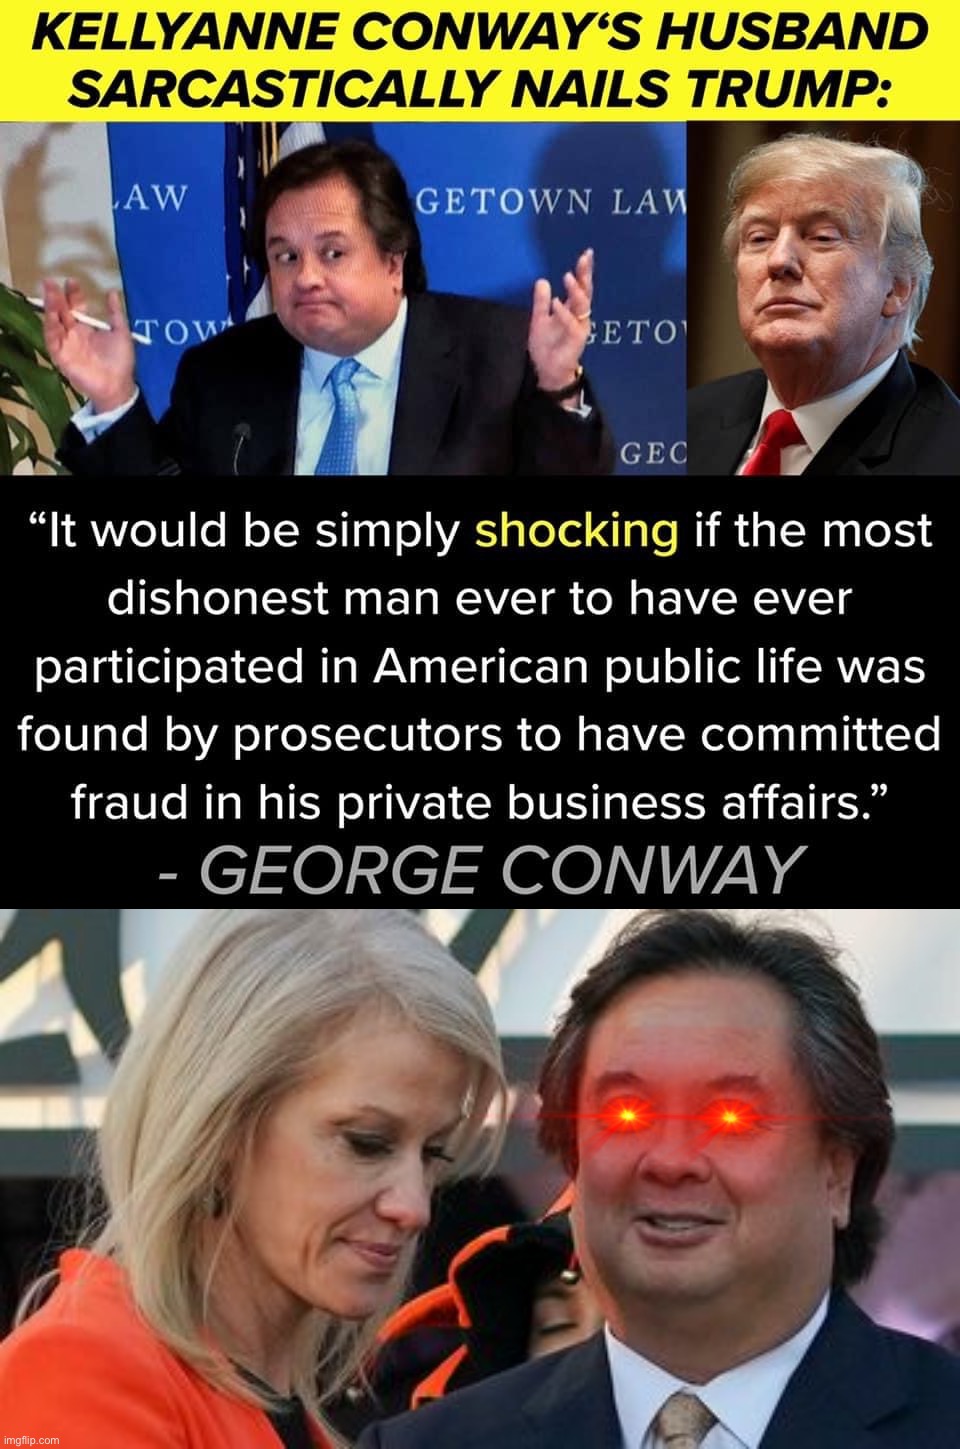 hahahahahahaha fat george is sleepin in the doghouse again maga | image tagged in george conway roasts trump,kellyanne conway and george conway,maga,kellyanne conway,politics lol,political humor | made w/ Imgflip meme maker